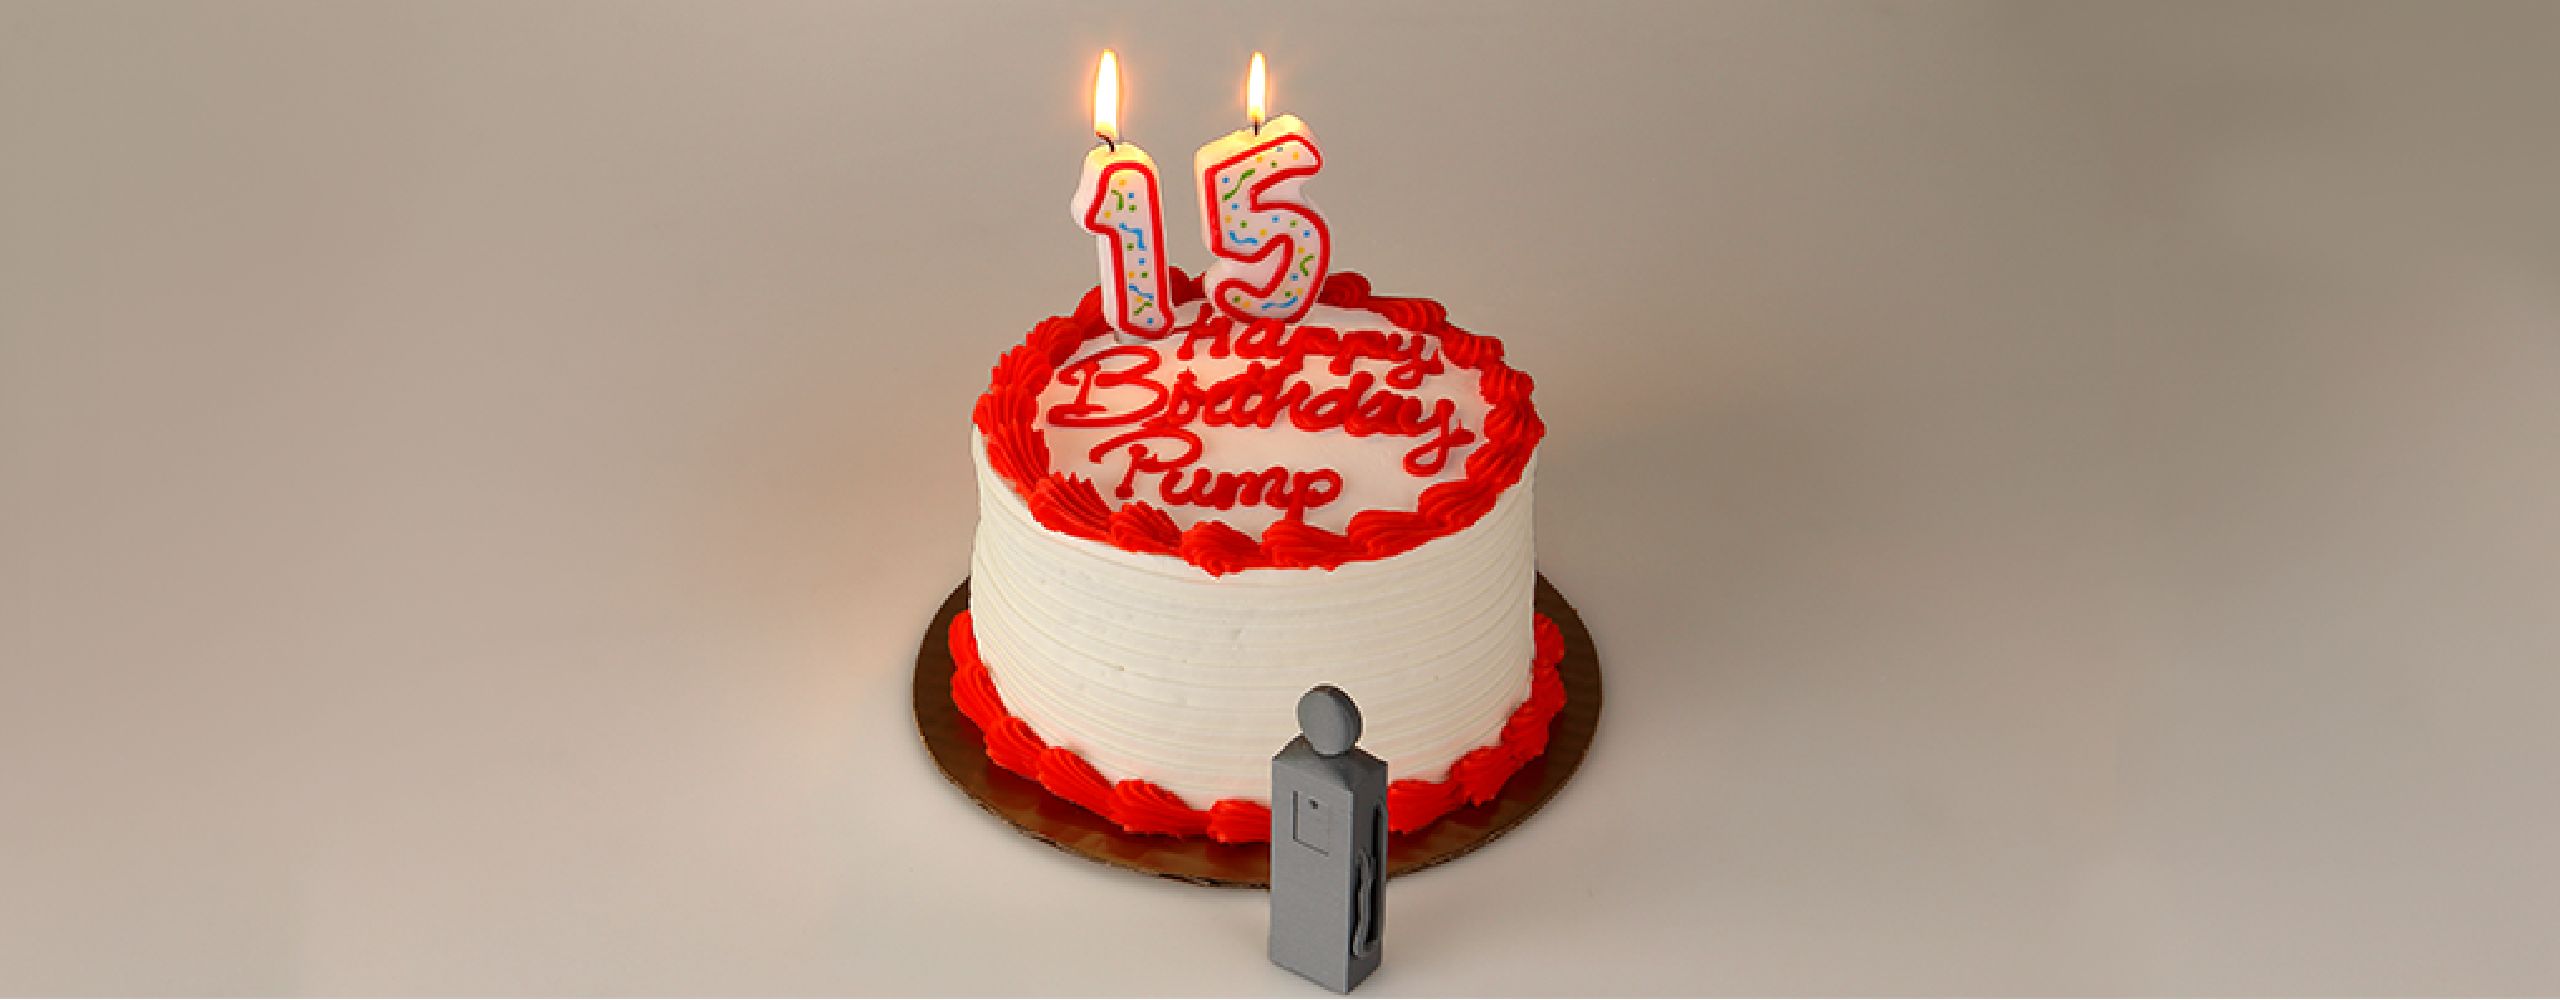 A red boarded birthday cake that reads "Happy Birthday Pump" There is a 1 and 5 candle lit up on the cake and a gray 3D printed gasoline pump in front of the cake.